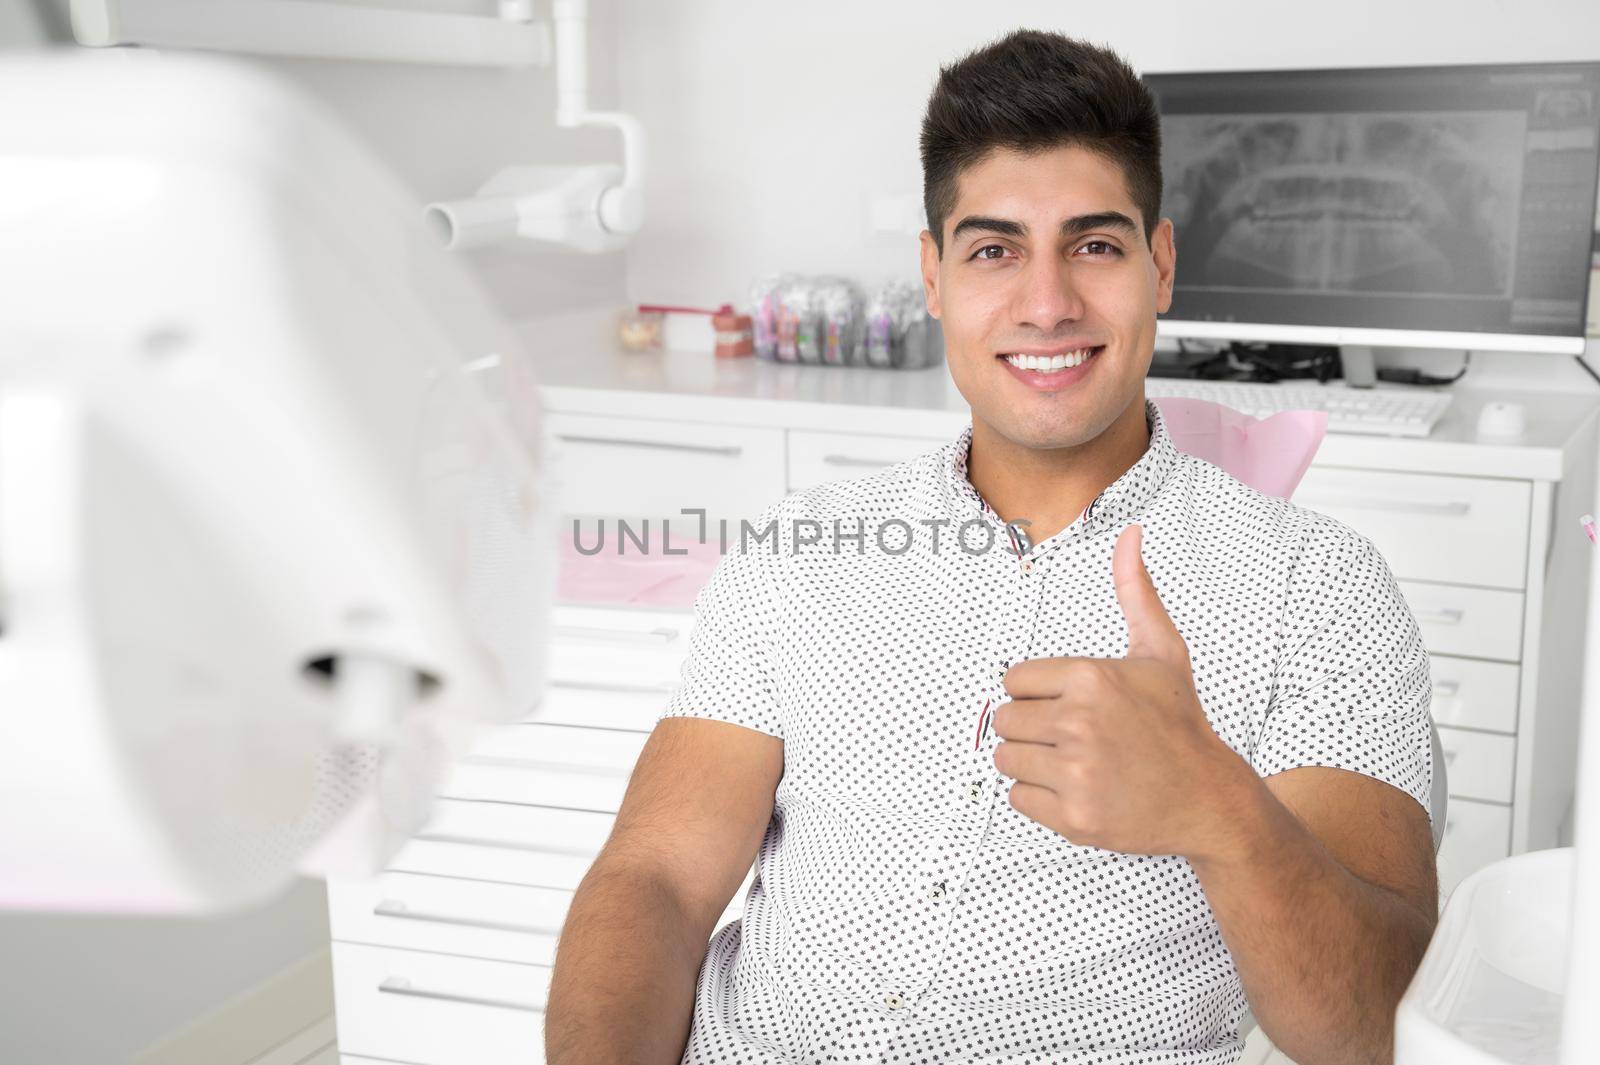 Man giving thumbs up at dentist office by HERRAEZ